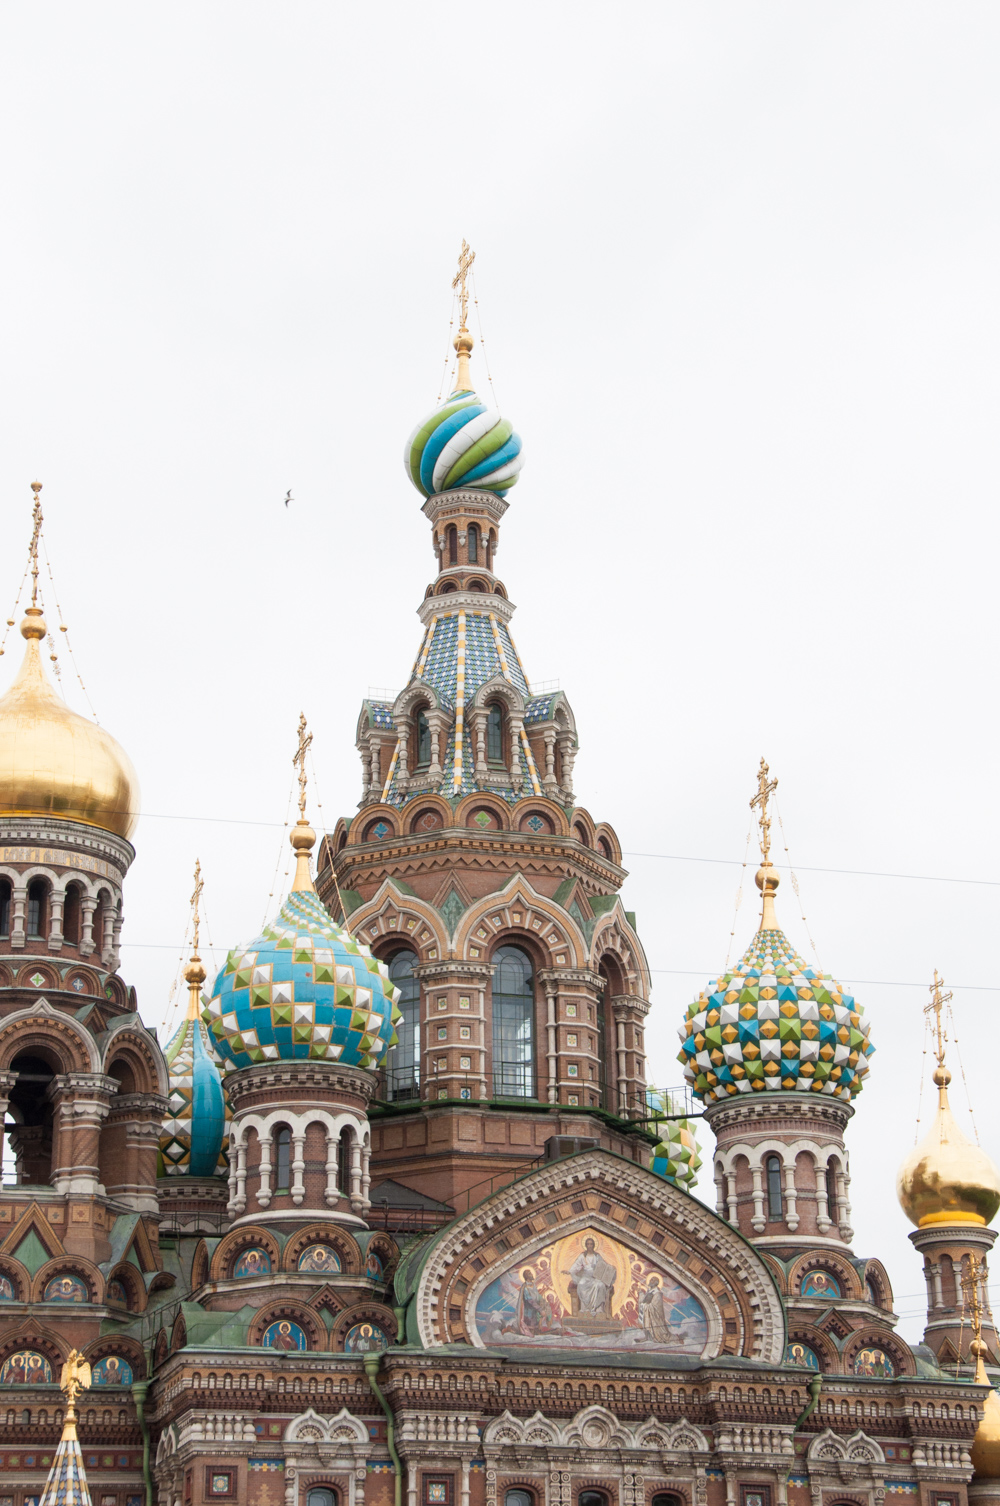 Church of the Savior on Spilled Blood in Saint Petersburg, Russia